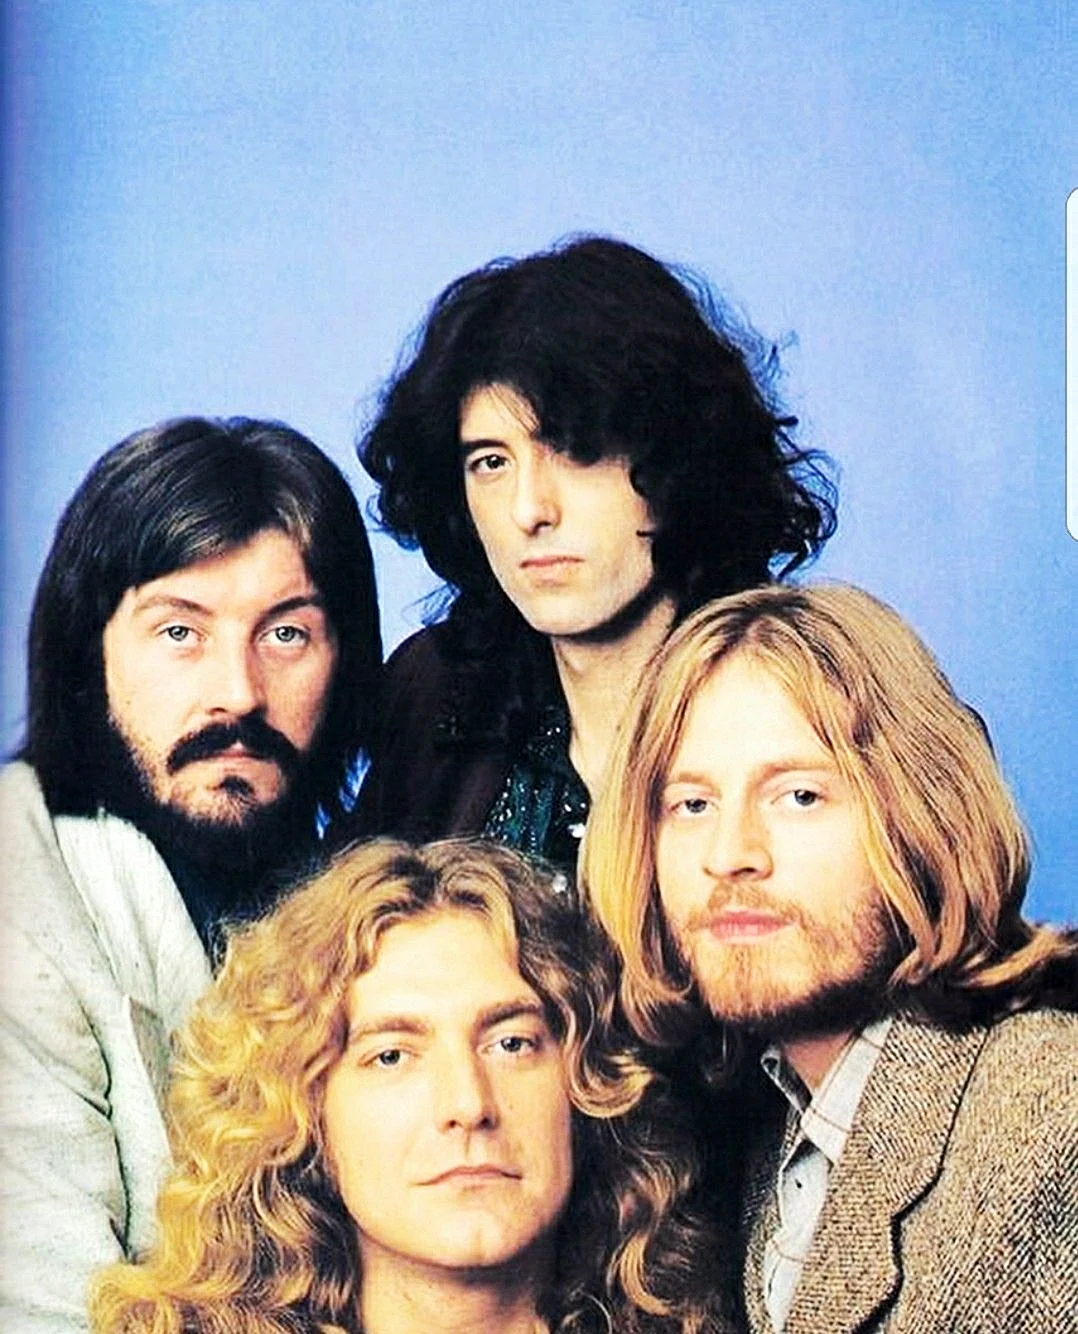 Led Zeppelin Band Wallpaper For iPhone